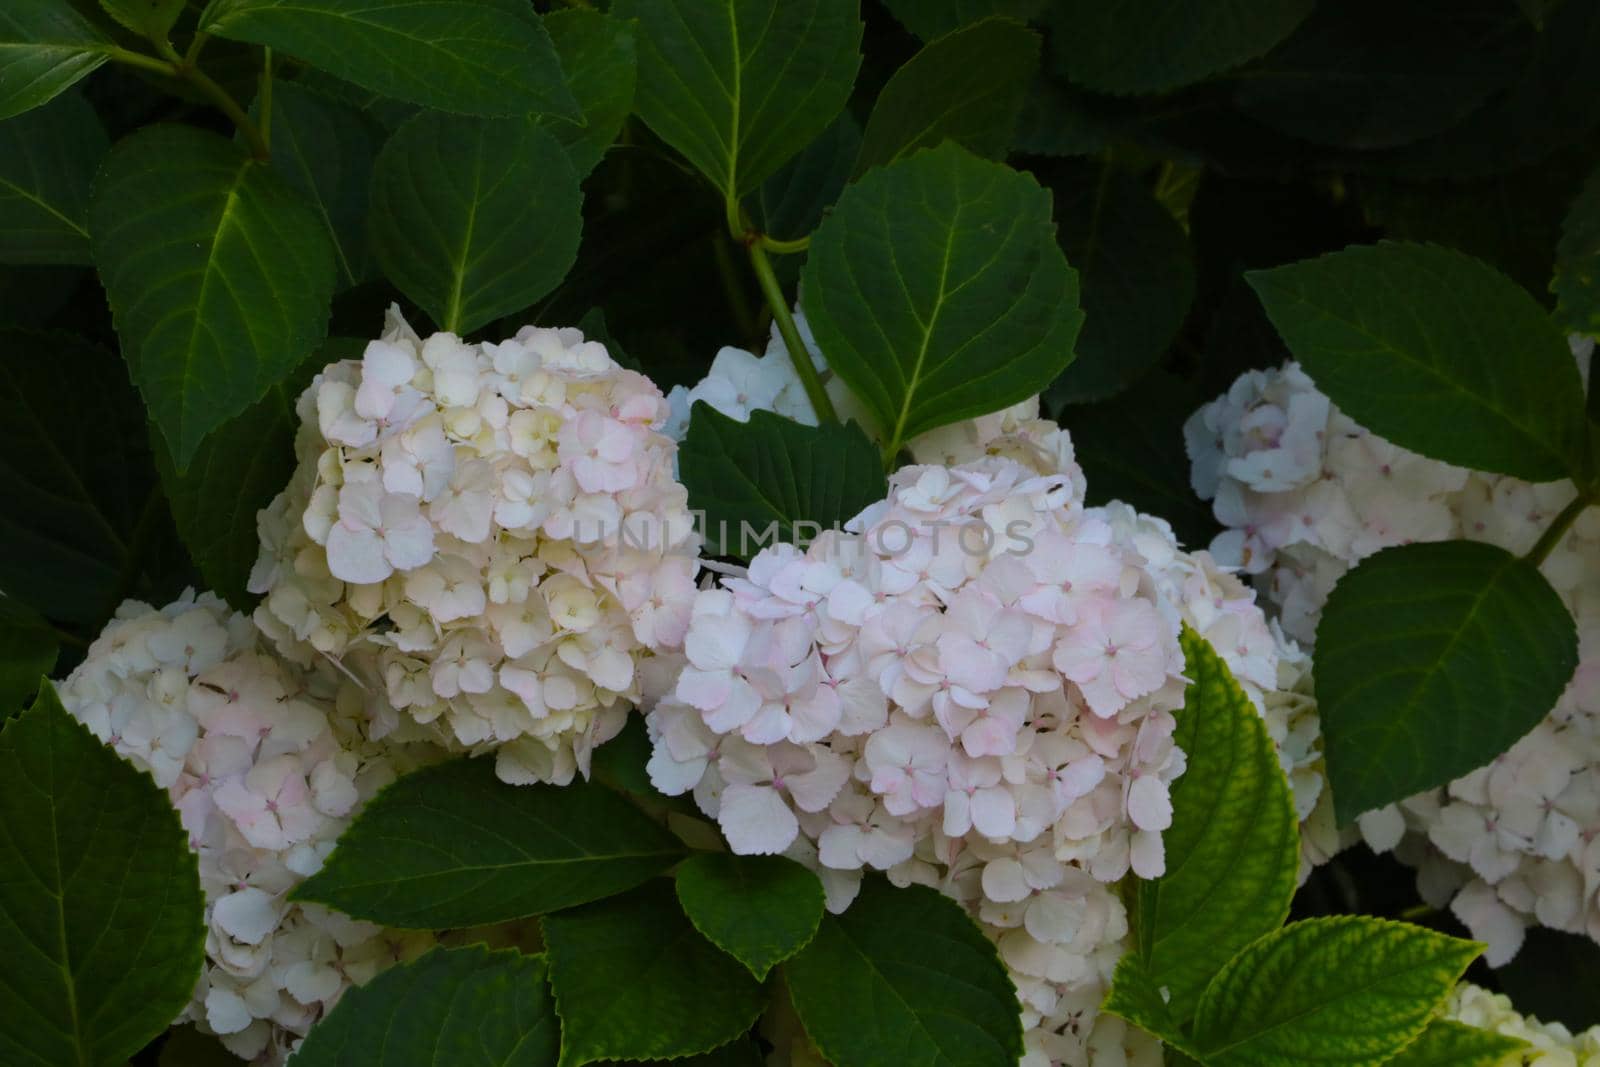 Buds of flowering hydrangeas in the park in the spring